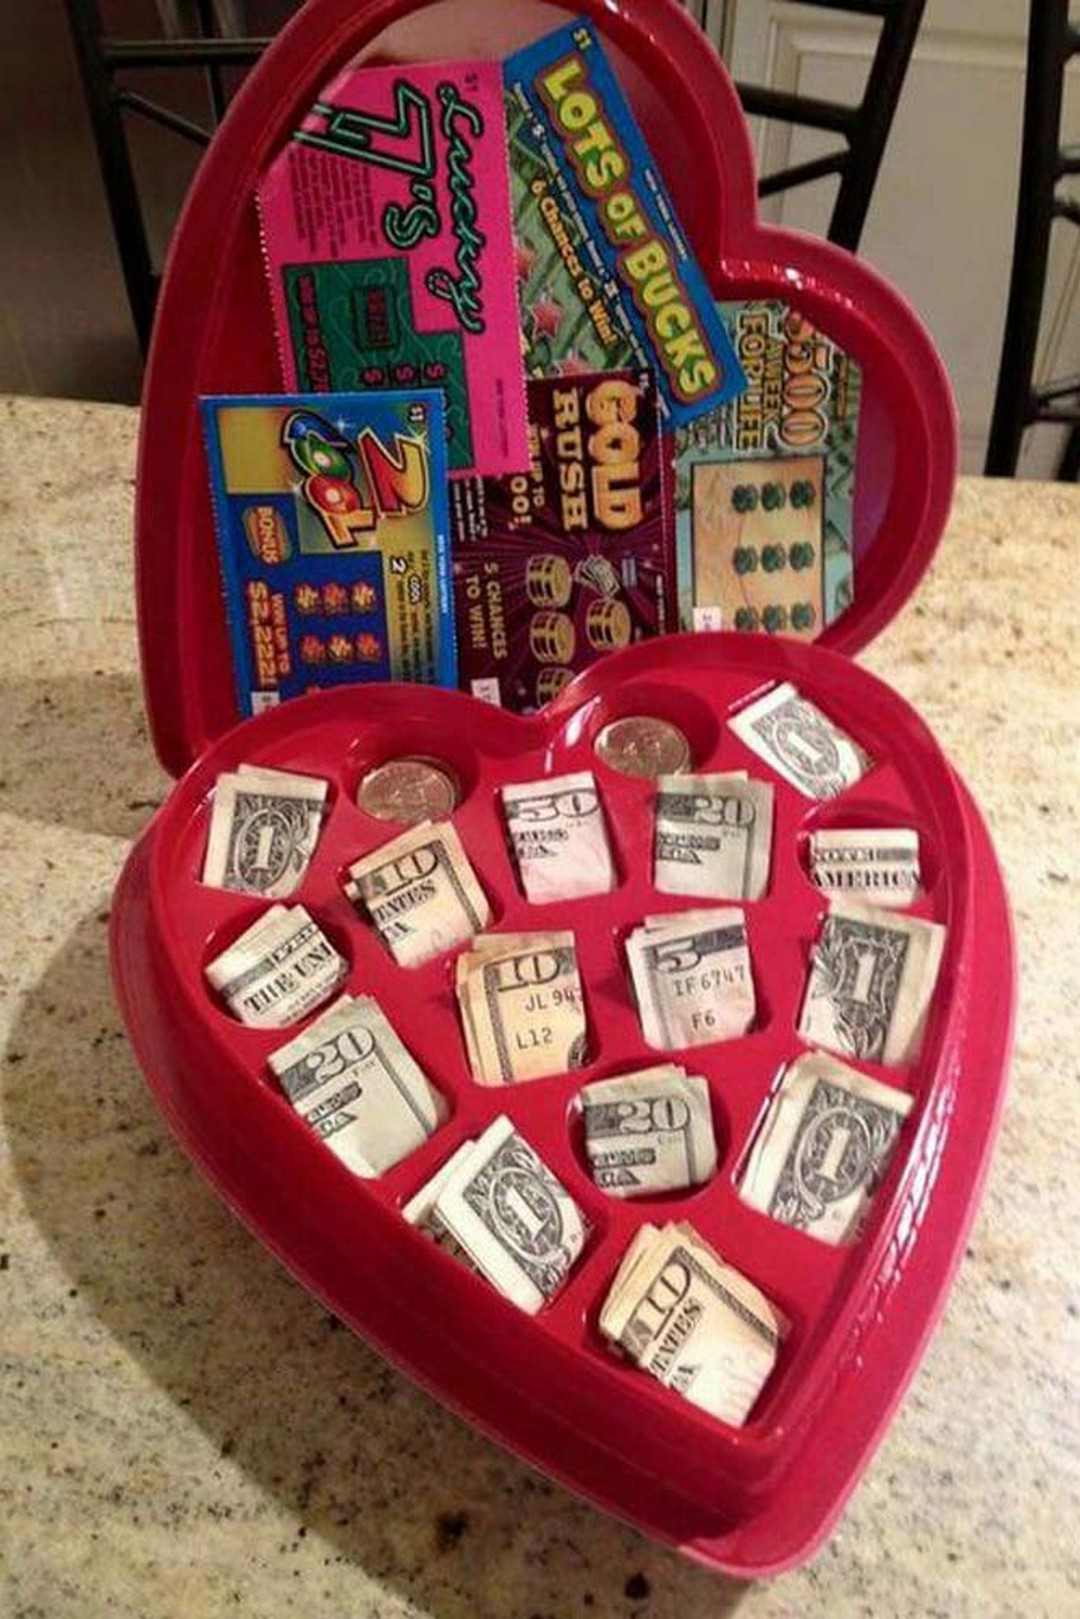 DIY Valentines Gifts For Girlfriend
 Romantic DIY Valentines Day Gifts For Your Boyfriend